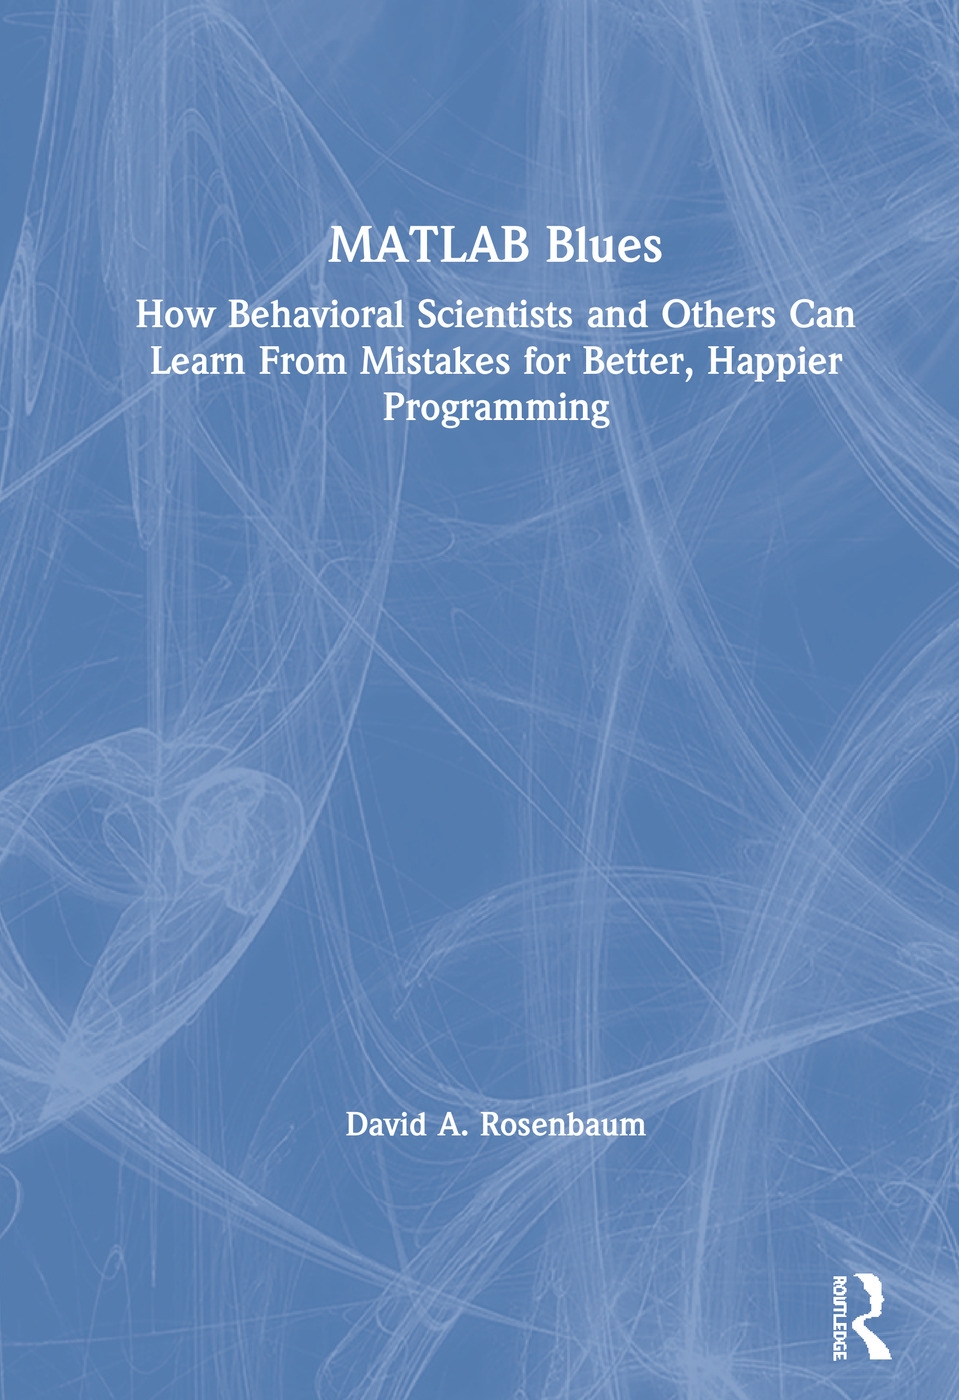 MATLAB Blues: How Behavioral Scientists and Others Can Learn from Mistakes for Better, Happier Programming